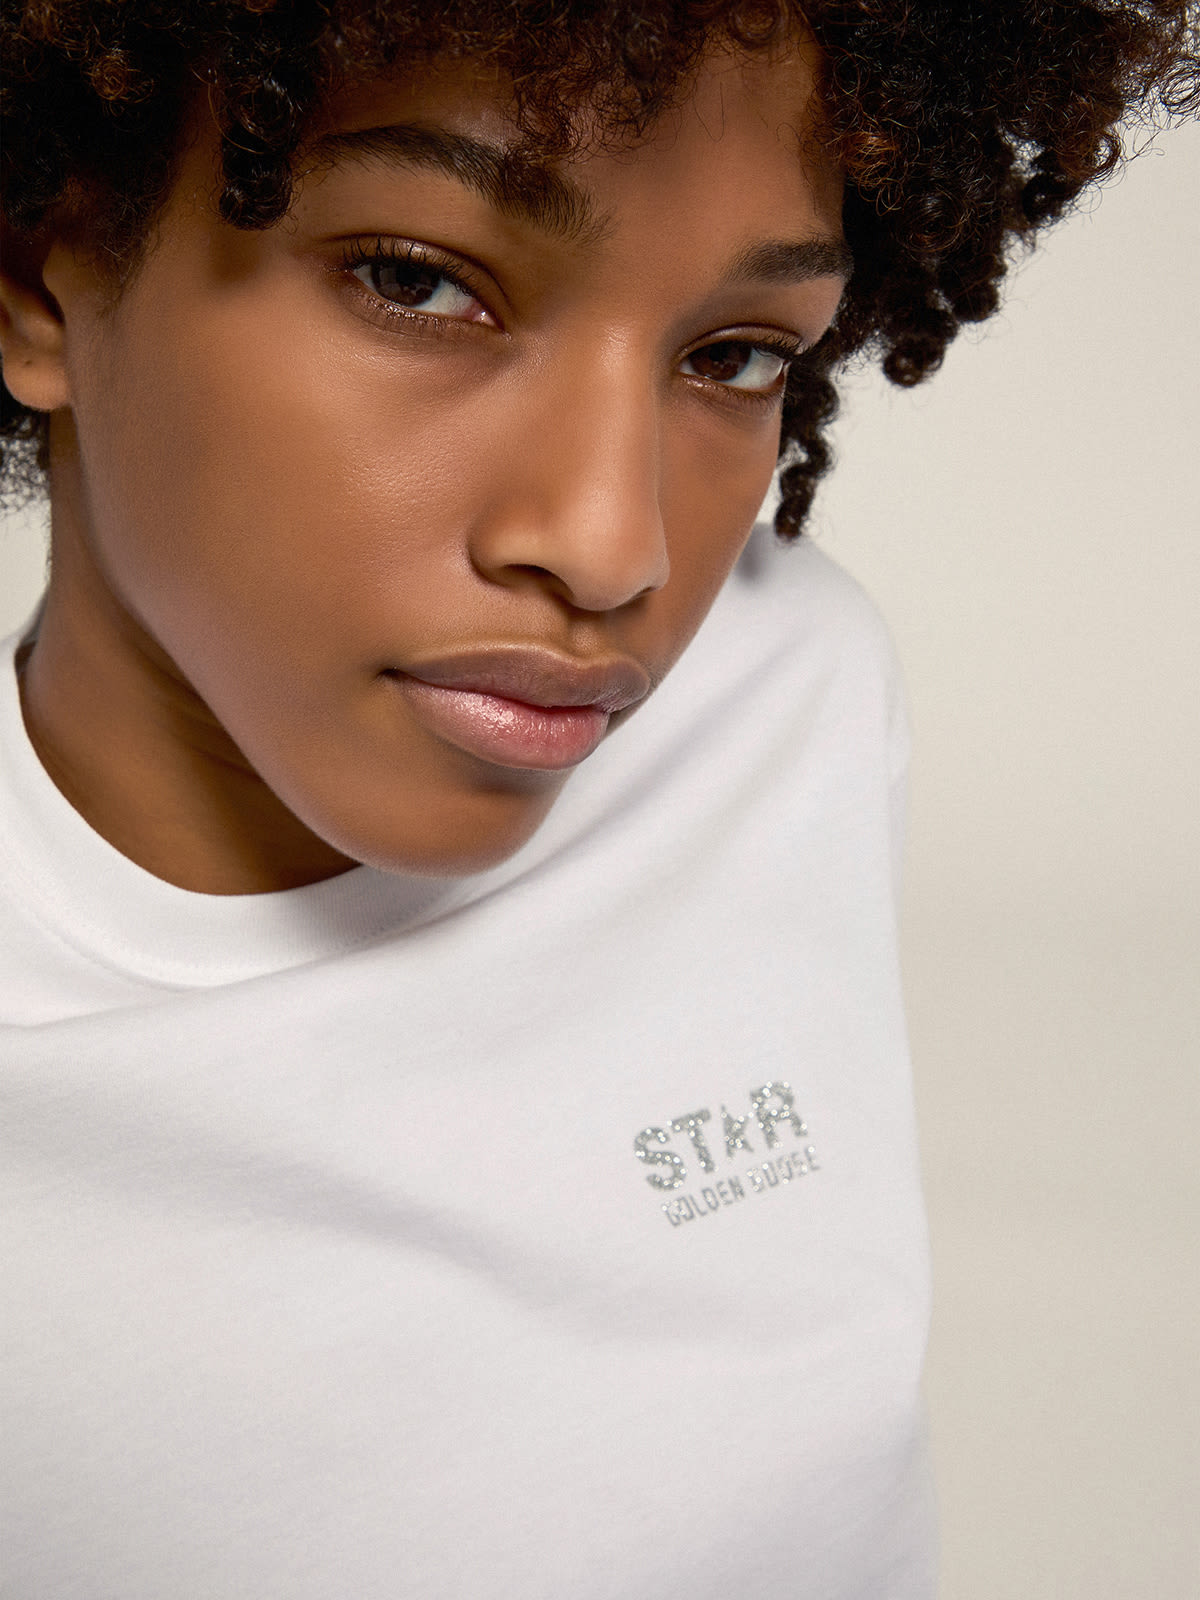 Golden Goose - Women's white T-shirt with silver glitter logo and star in 